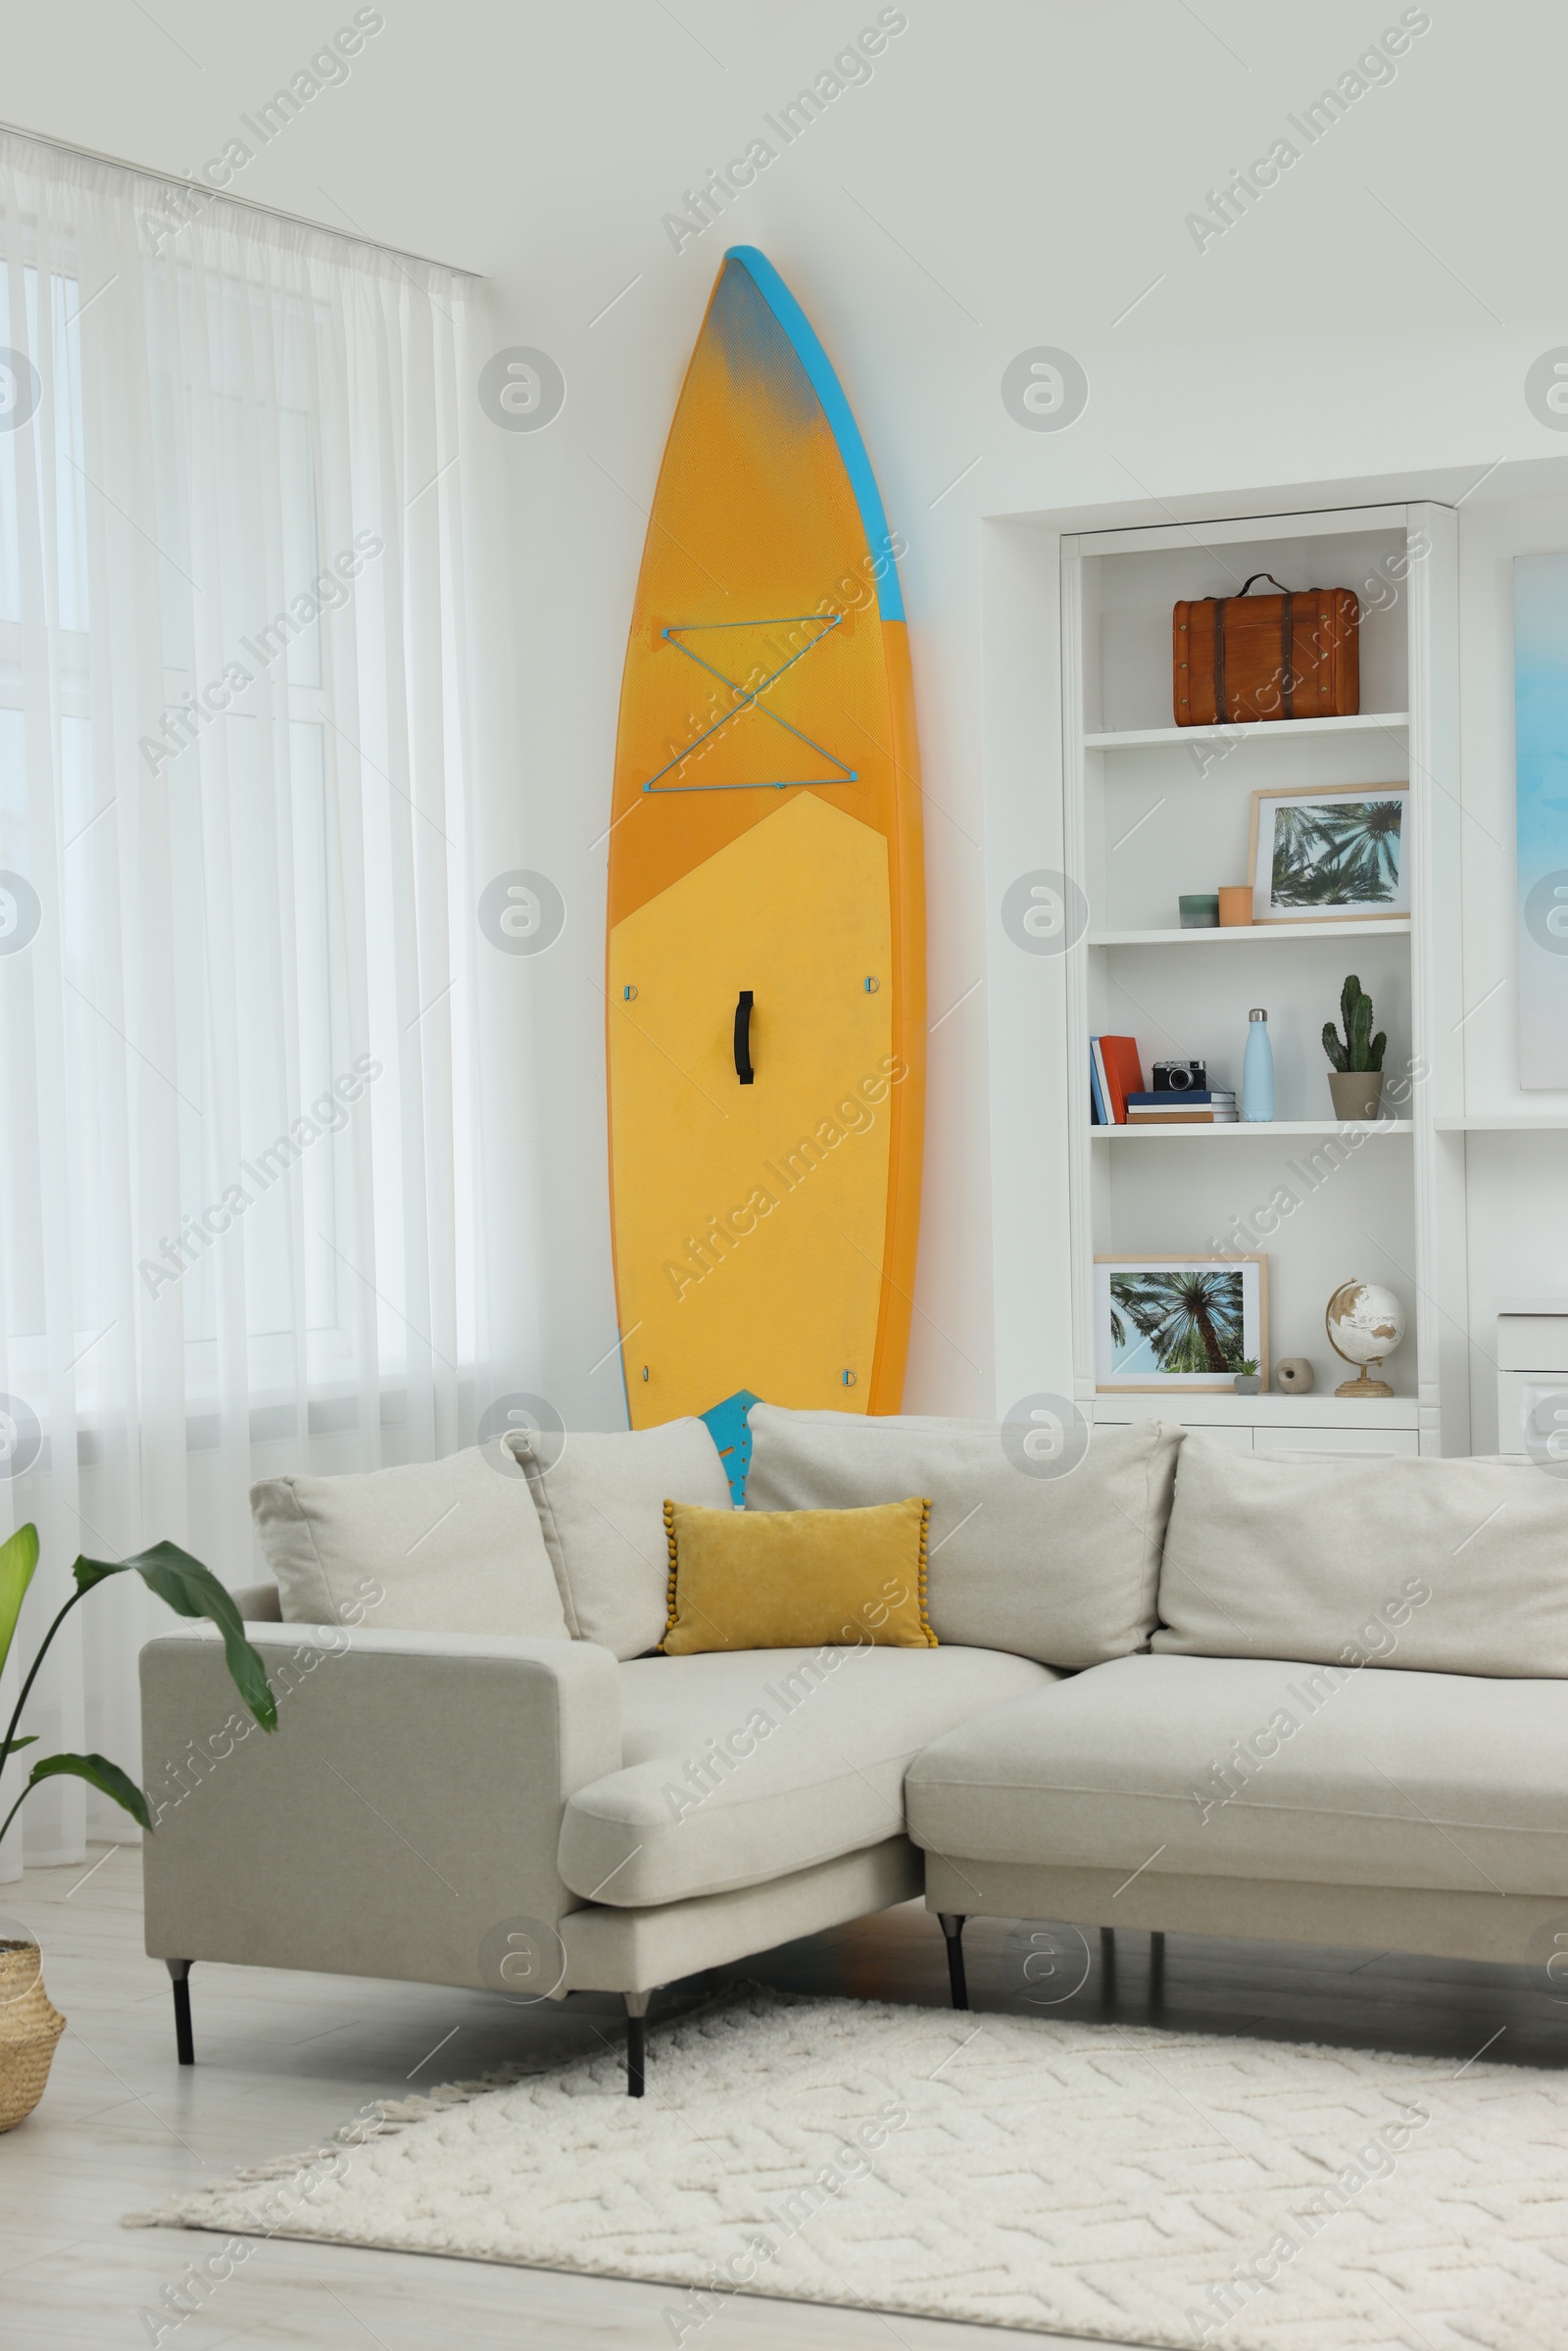 Photo of SUP board, shelving unit with different decor elements and stylish sofa in room. Interior design